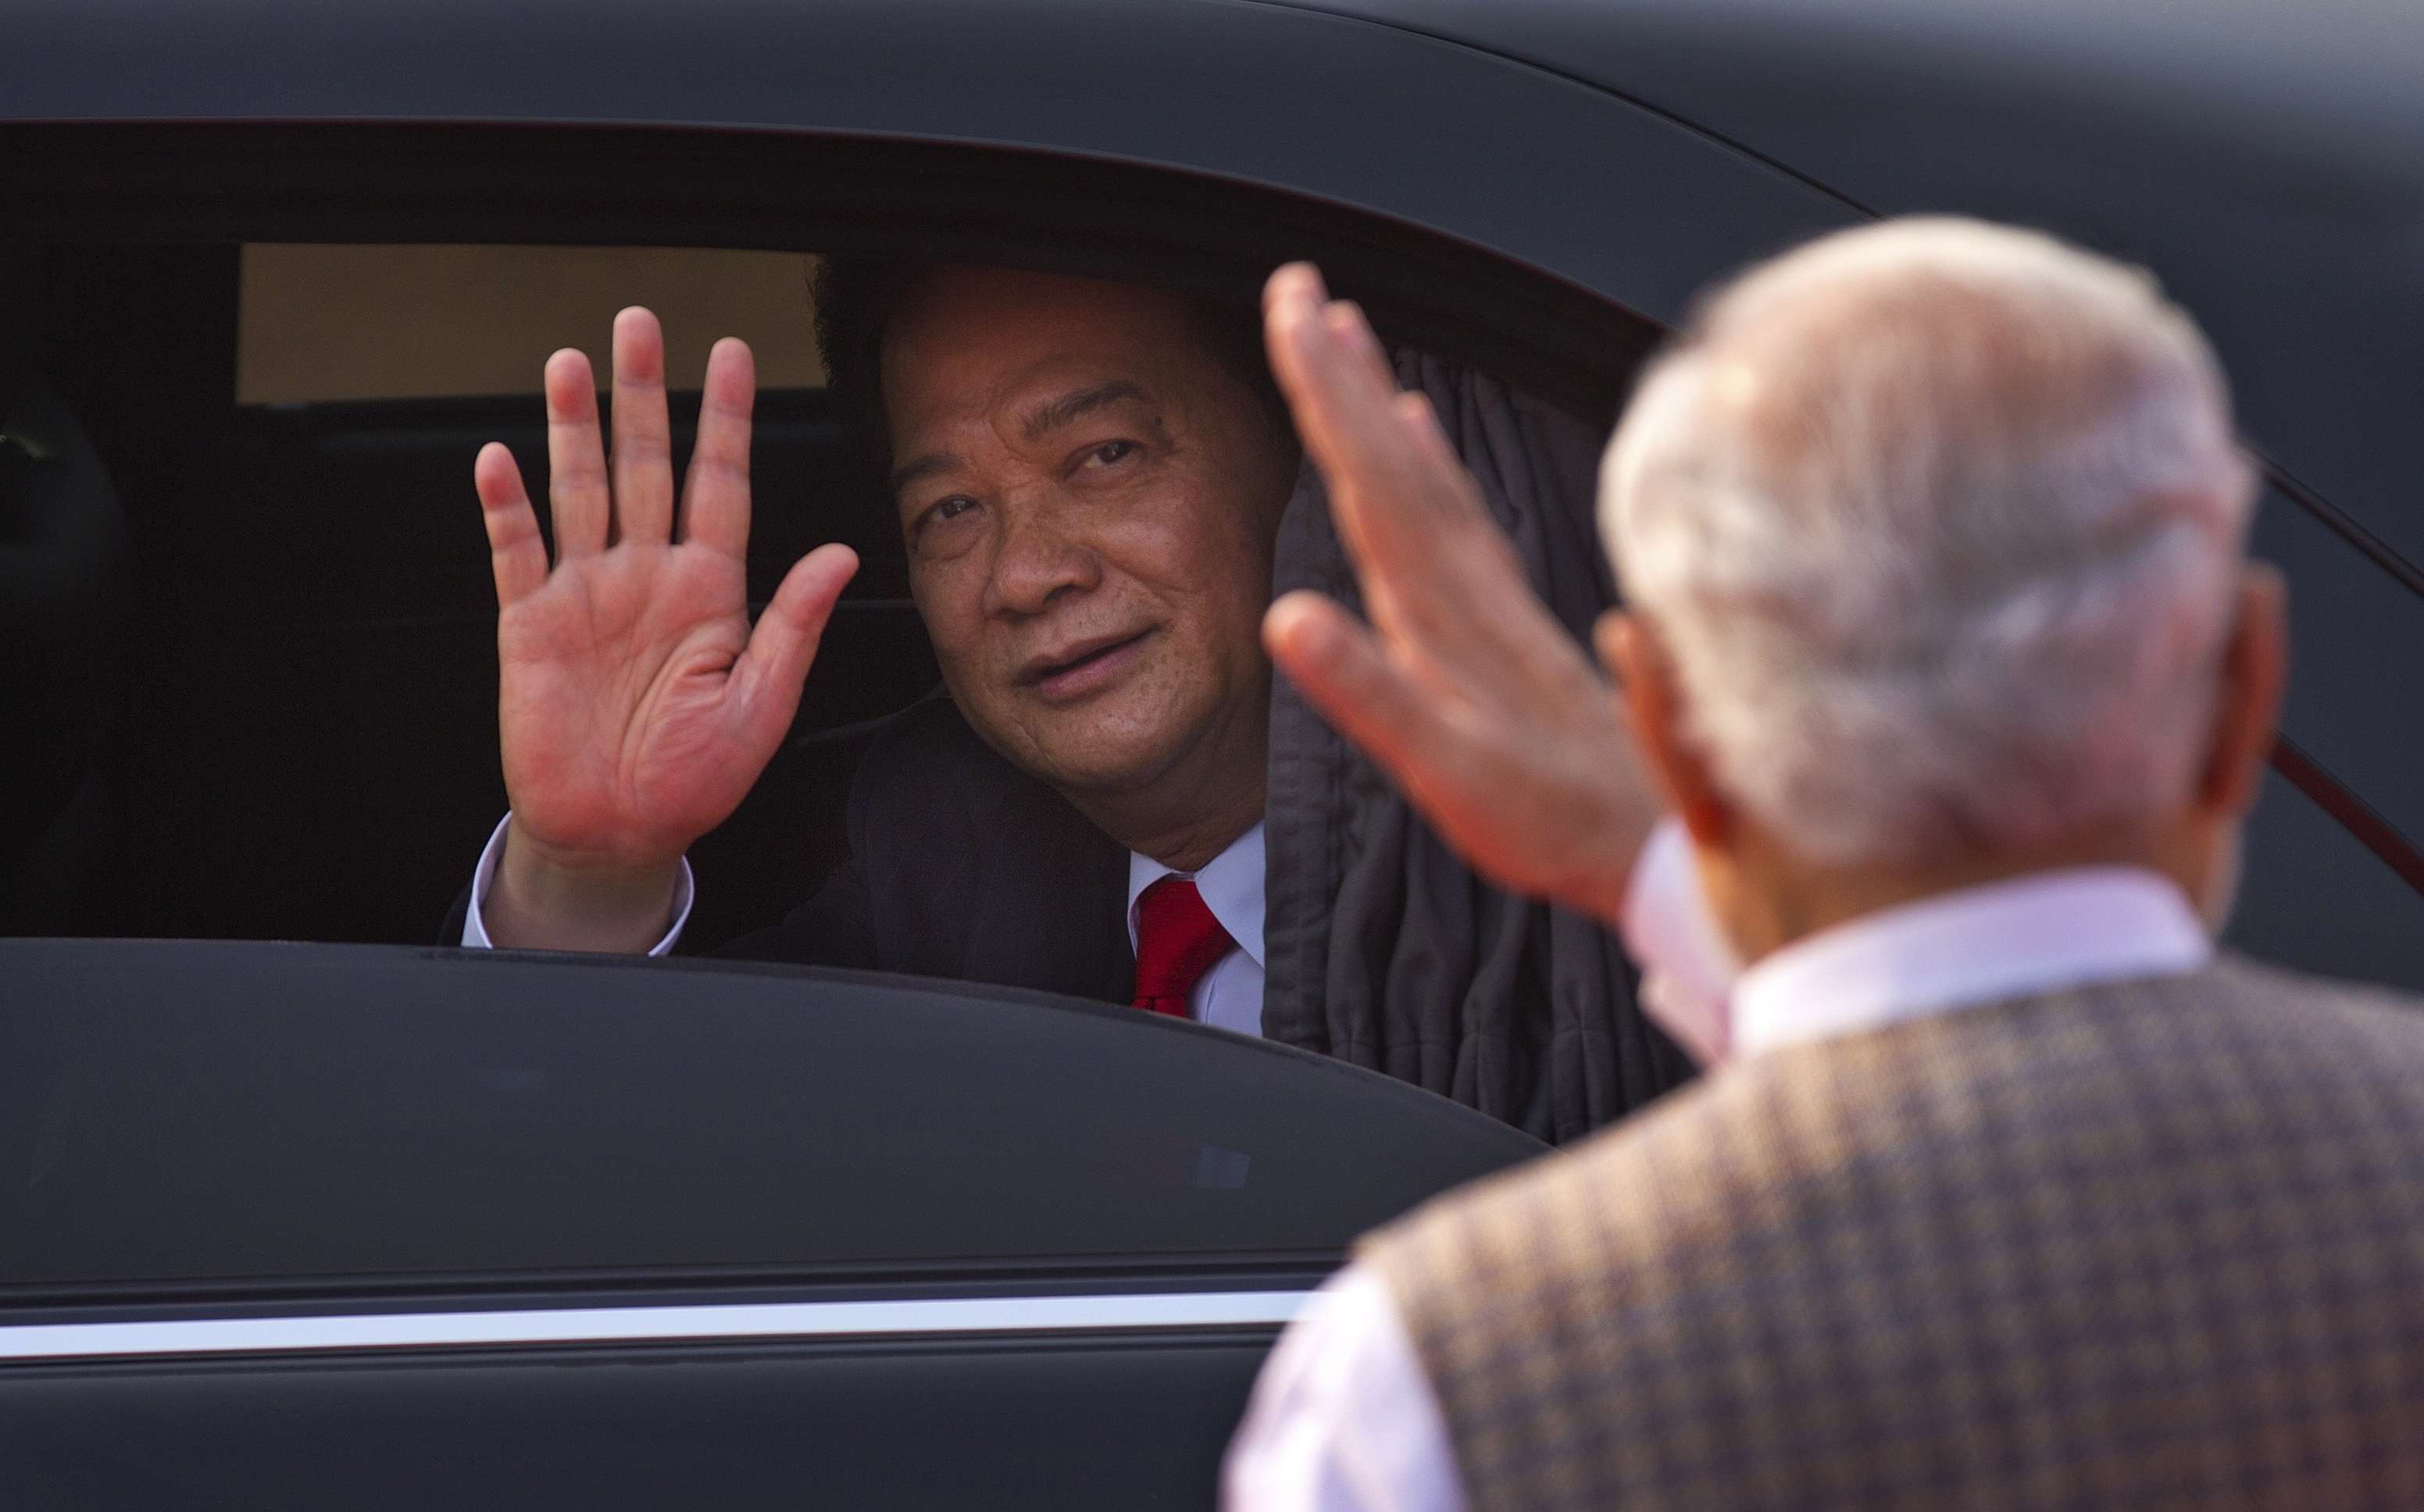 Indian Prime Minister Narendra Modi, right, waves at Vietnam Prime Minister Nguyen Tan Dung, as he leaves after his ceremonial reception at the forecourt of the Indian President's palace in New Delhi, India in 2014. Photo: AP